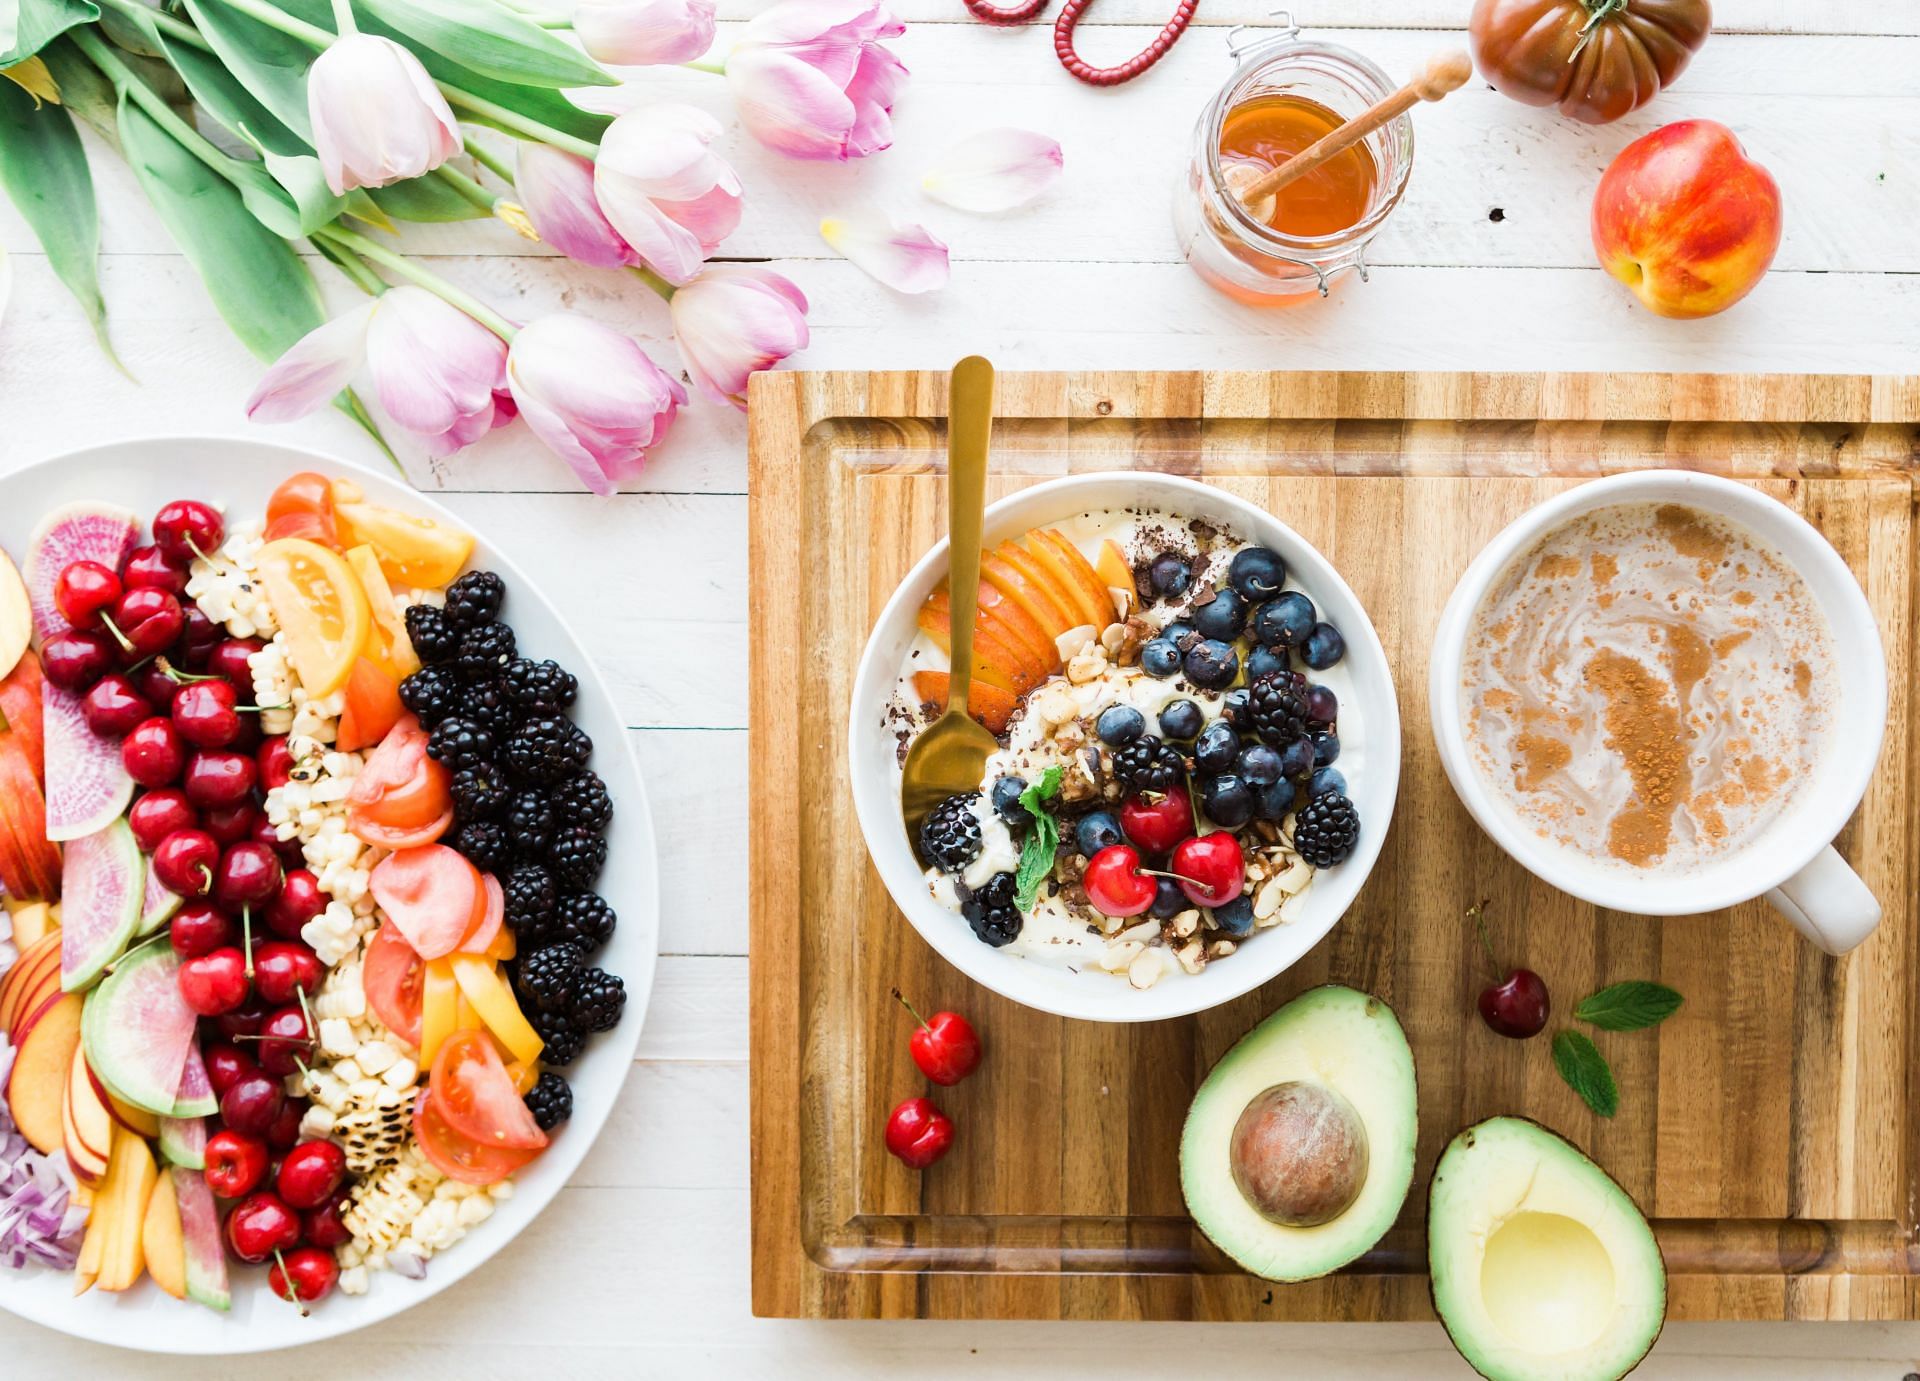 DASH diet is the best option if you want to stick to an eating strategy that is advised by specialists and improves your heart health. (Image via Unsplash/ Brooke Lark)